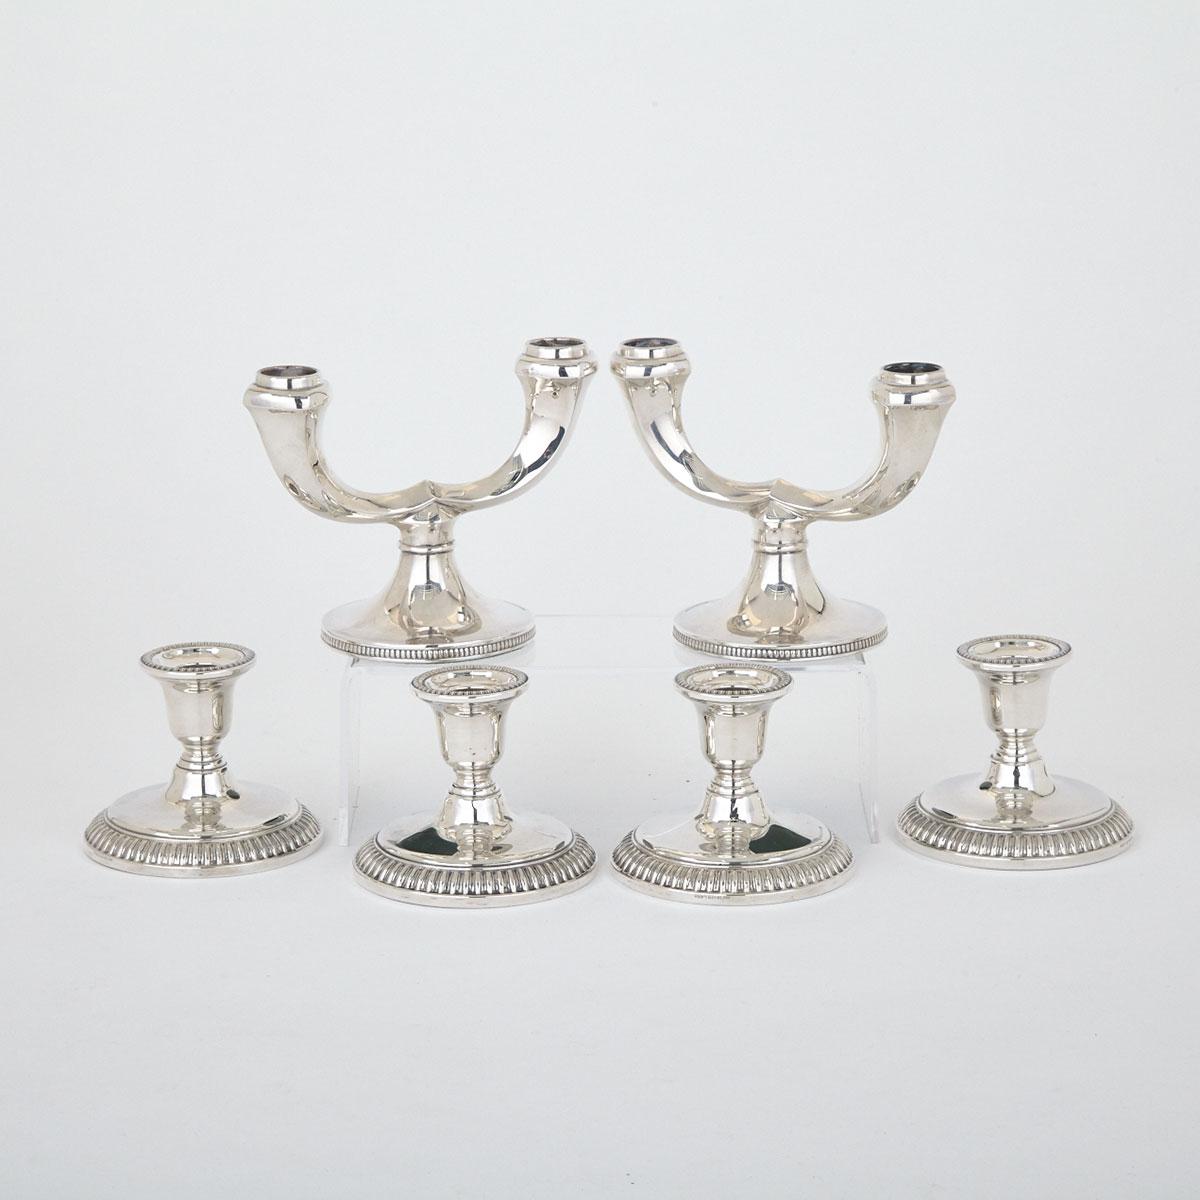 Set of Four Canadian Silver Low Candlesticks and a Pair of Two-Light Small Candelabra, Henry Birks & Sons, Montreal, Que., 20th century